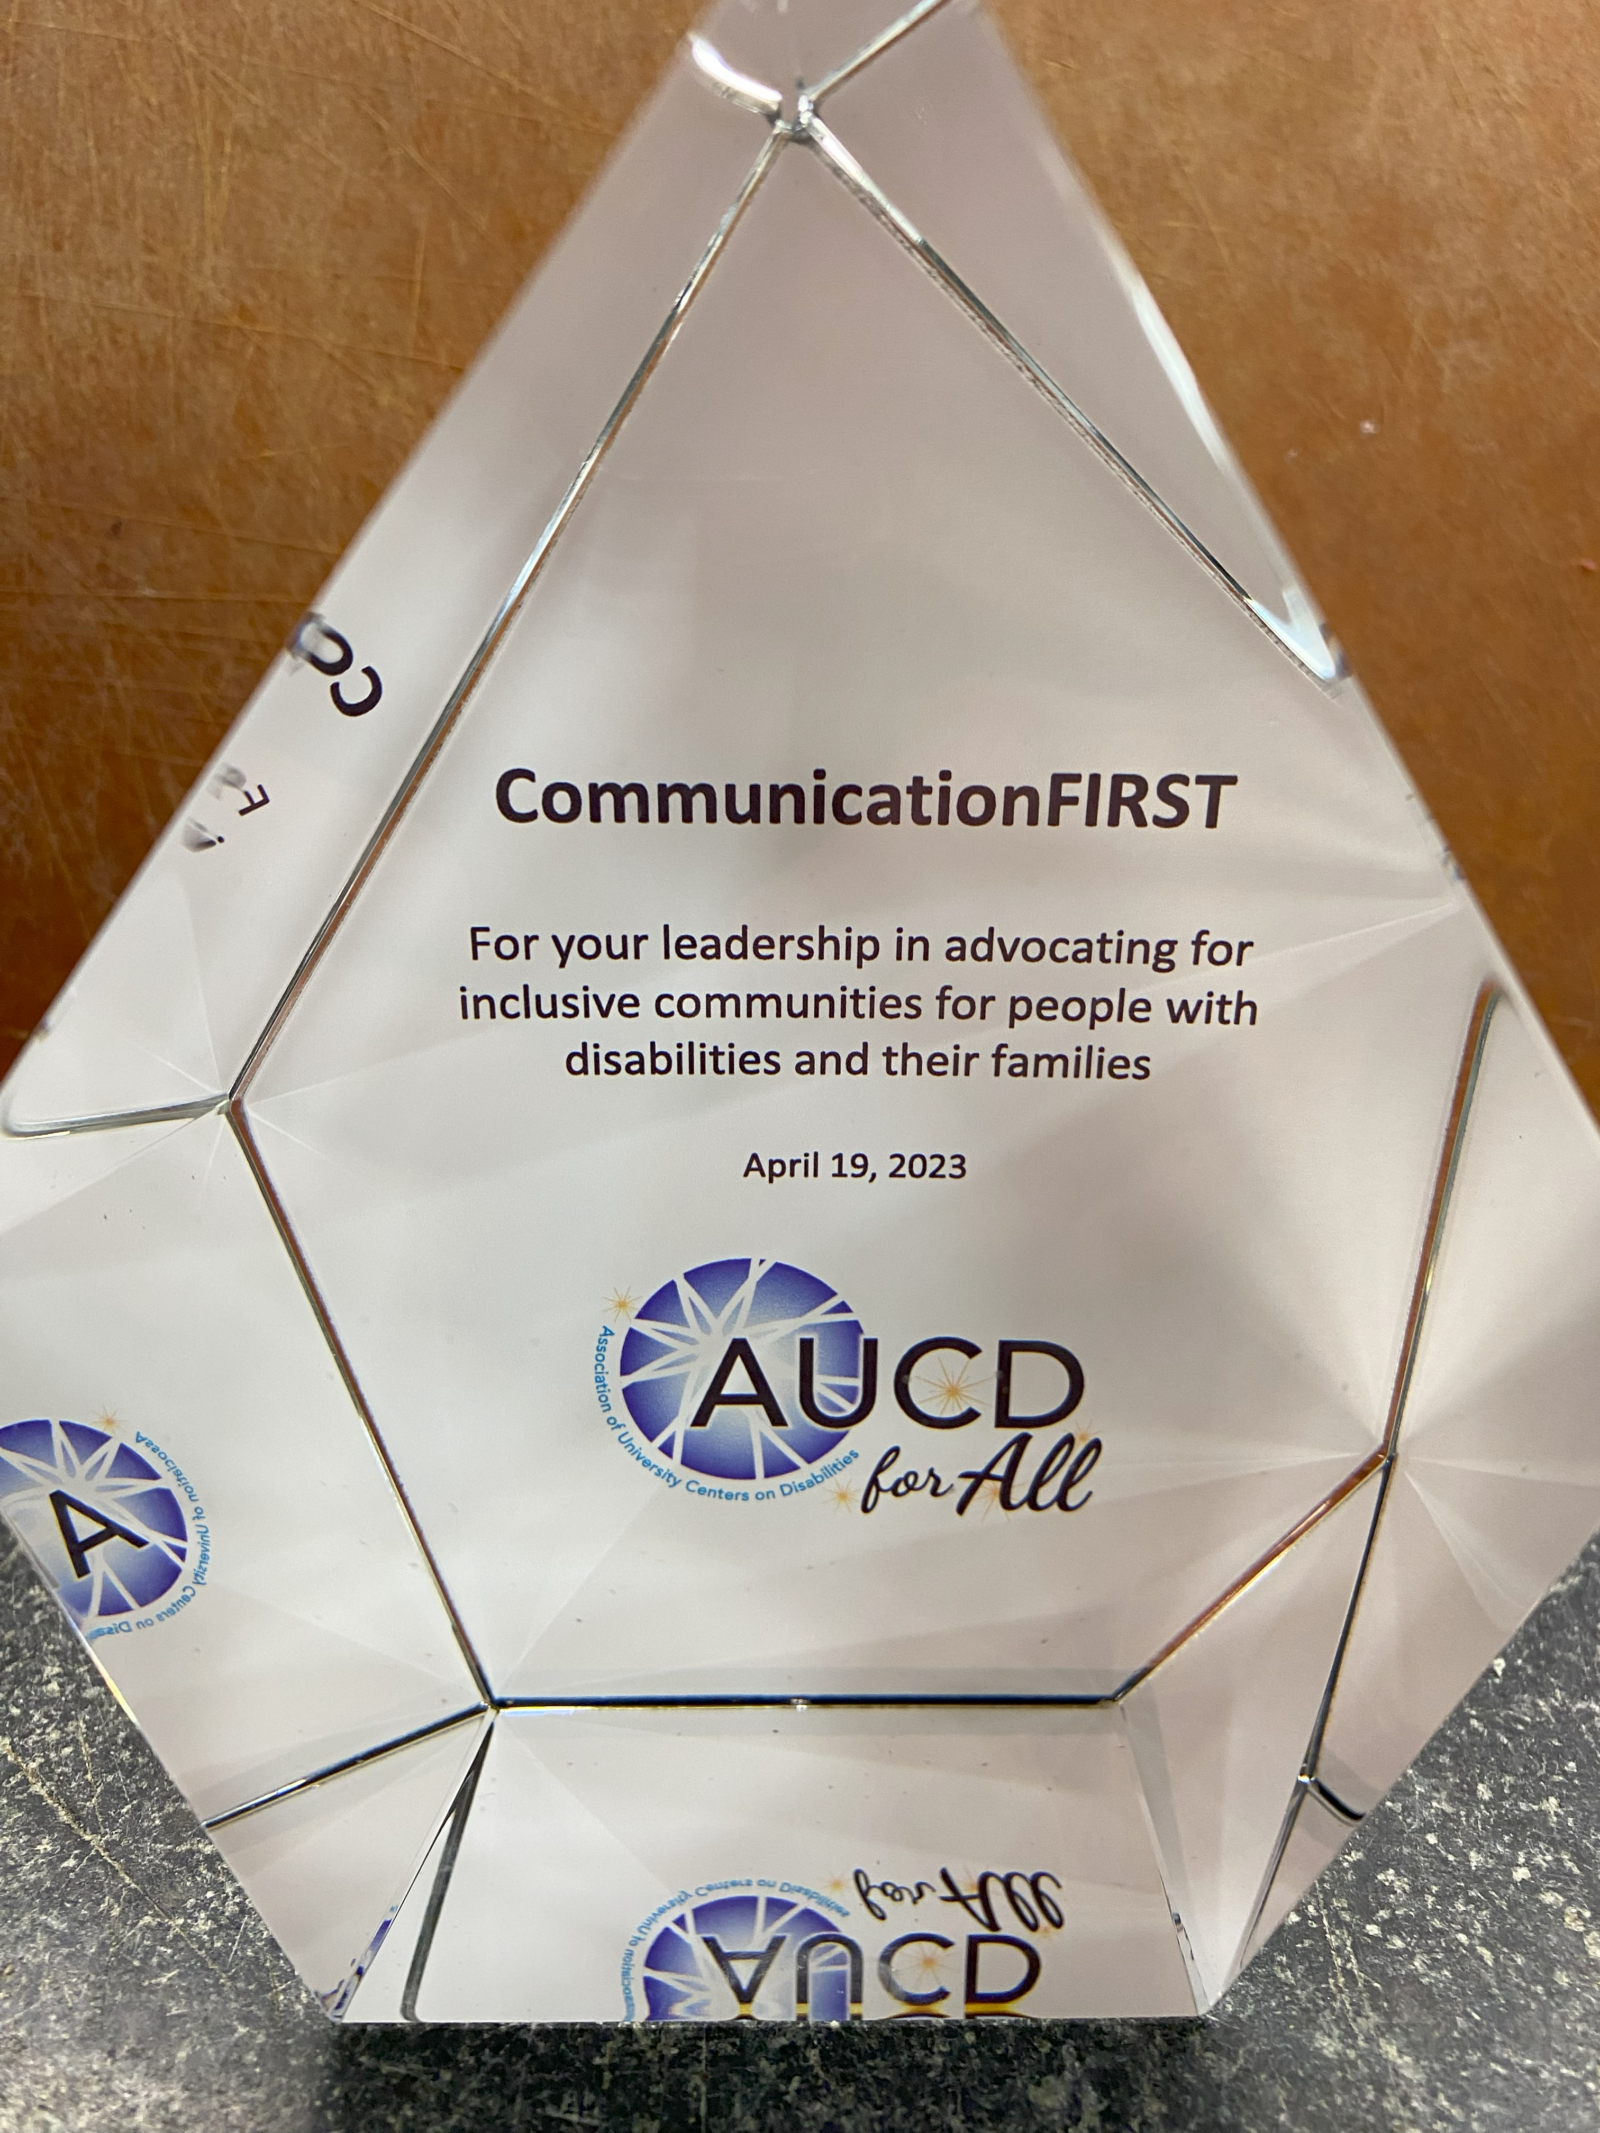 A head-on view of the AUCD award, which is a tall pentagon glass cube with the back of the cube lined in white with the text: "CommunicationFIRST - For your leadership in advocating for inclusive opportunities for people with disabilities and their families - April 19, 2023" the AUCD for All logo appears at the bottom.